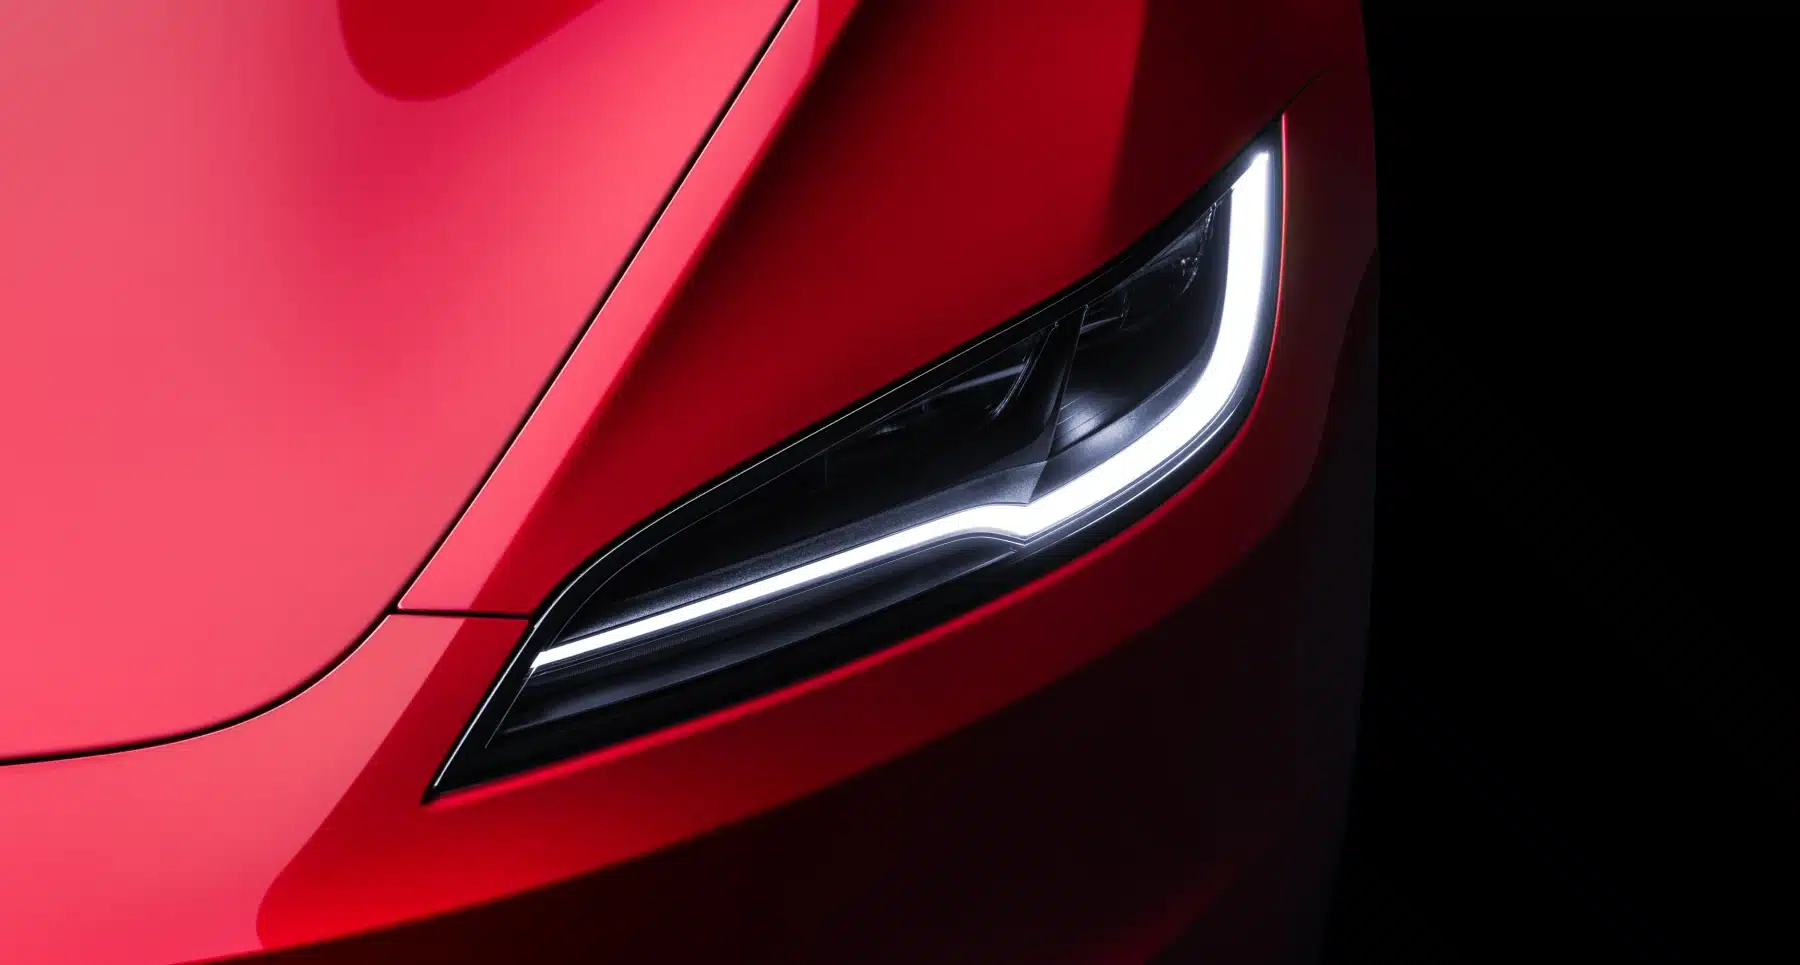 Tesla has updated its Model 3, with Model Y upgrades to come